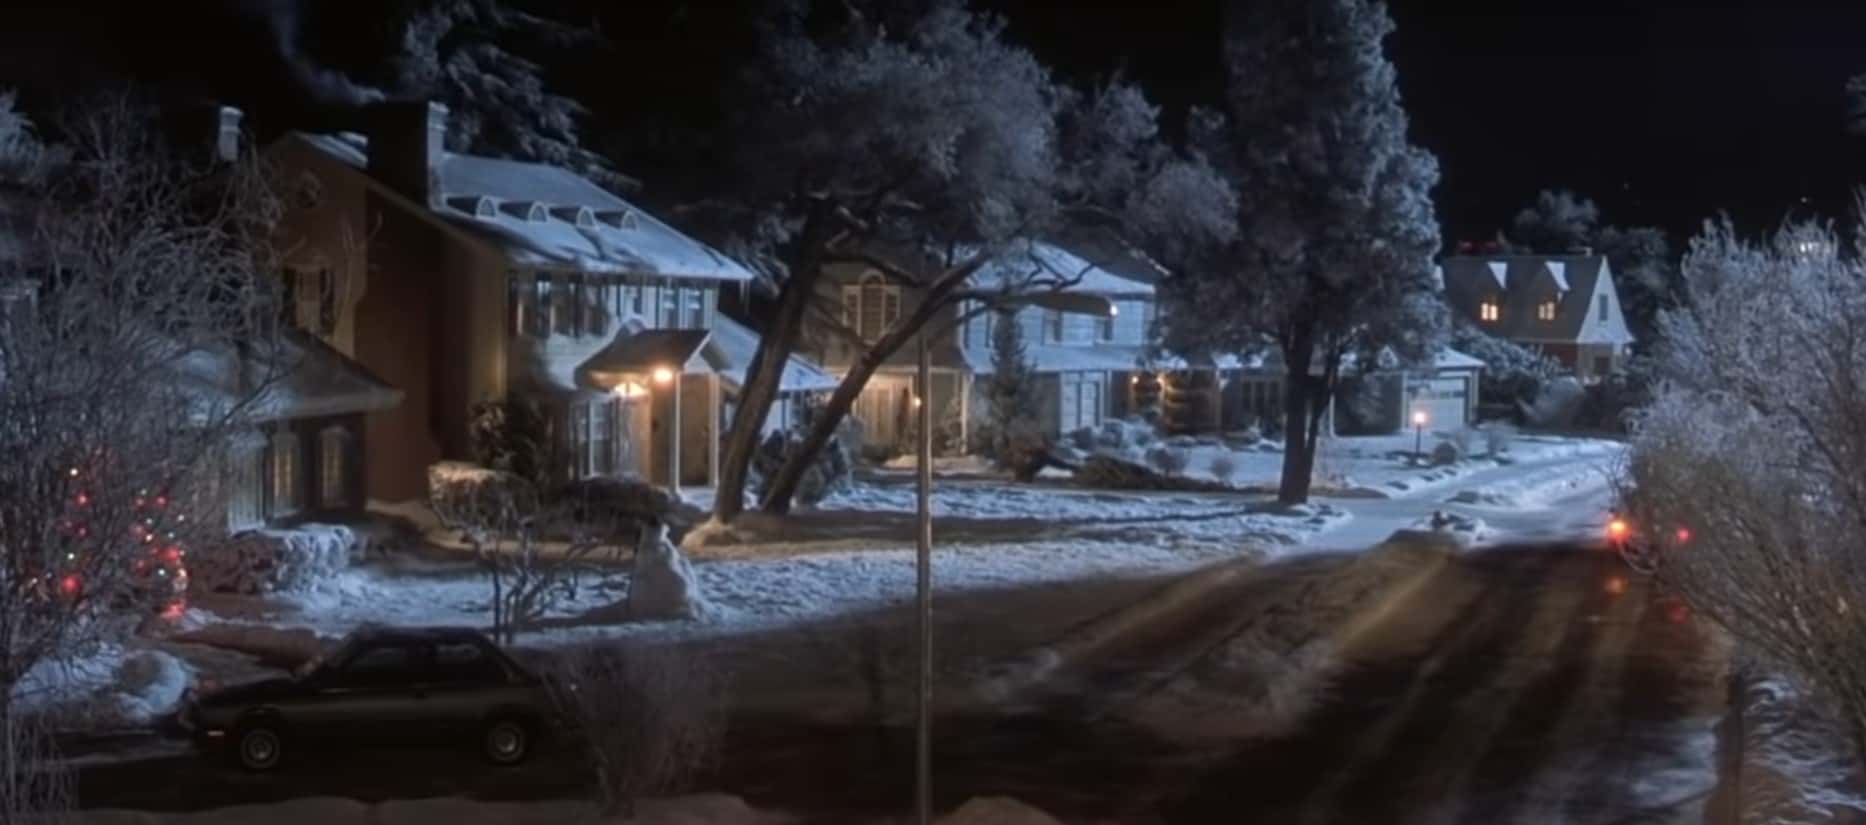 Christmas Vacation Filming Locations